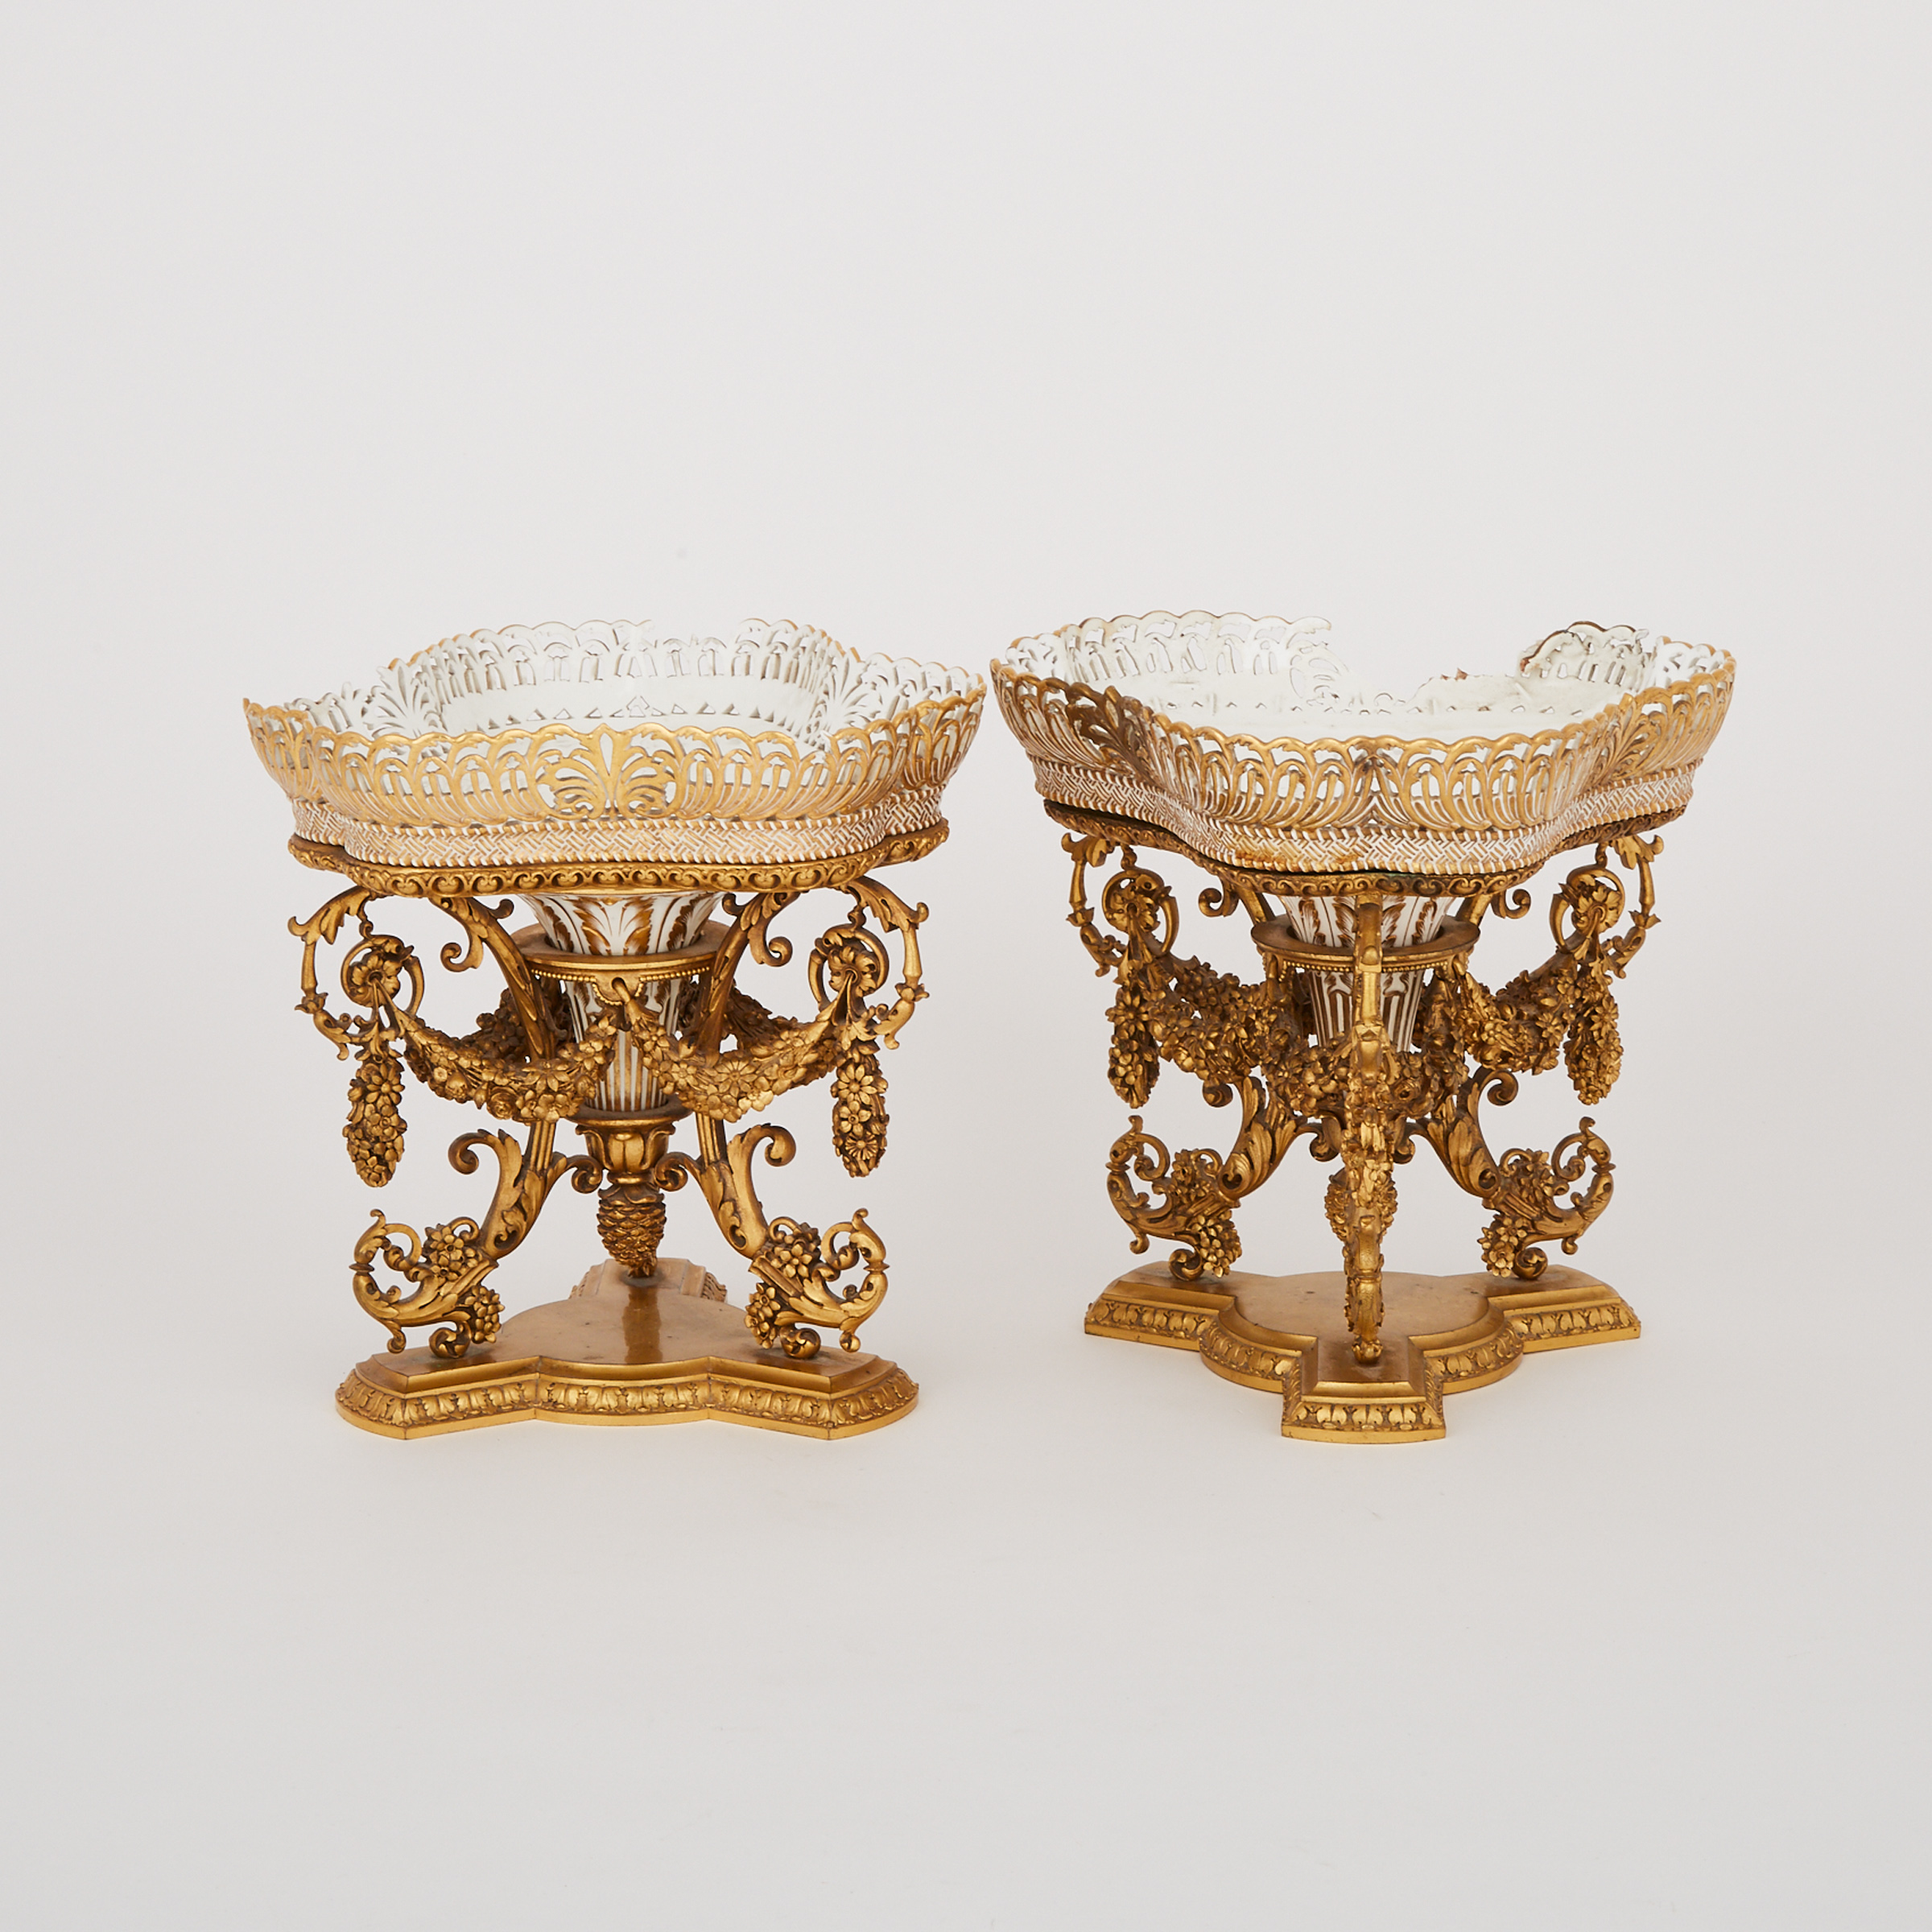 Pair of Ormolu Mounted Sèvres Pierced Comports, 19th century